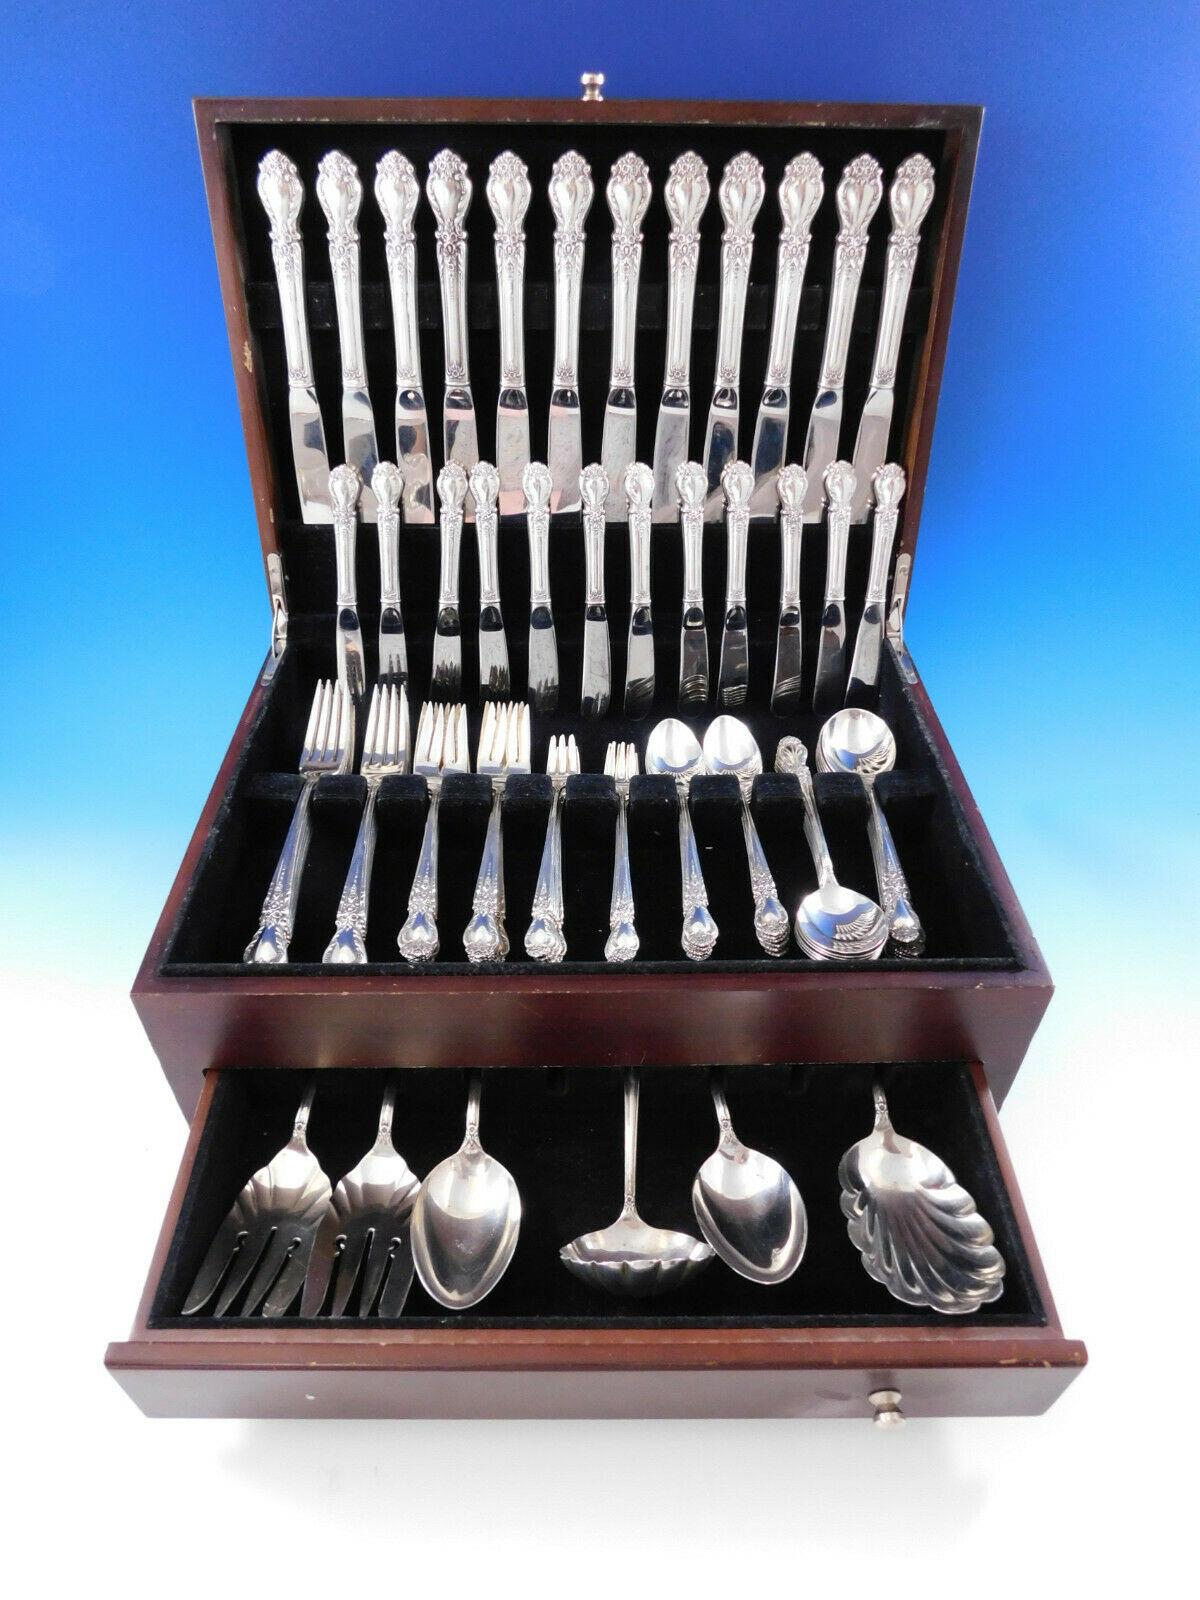 Dinner size brocade by International circa 1950 sterling silver Flatware set - 90 pieces, with timeless floral design. This set includes:

12 dinner size knives, 9 3/4